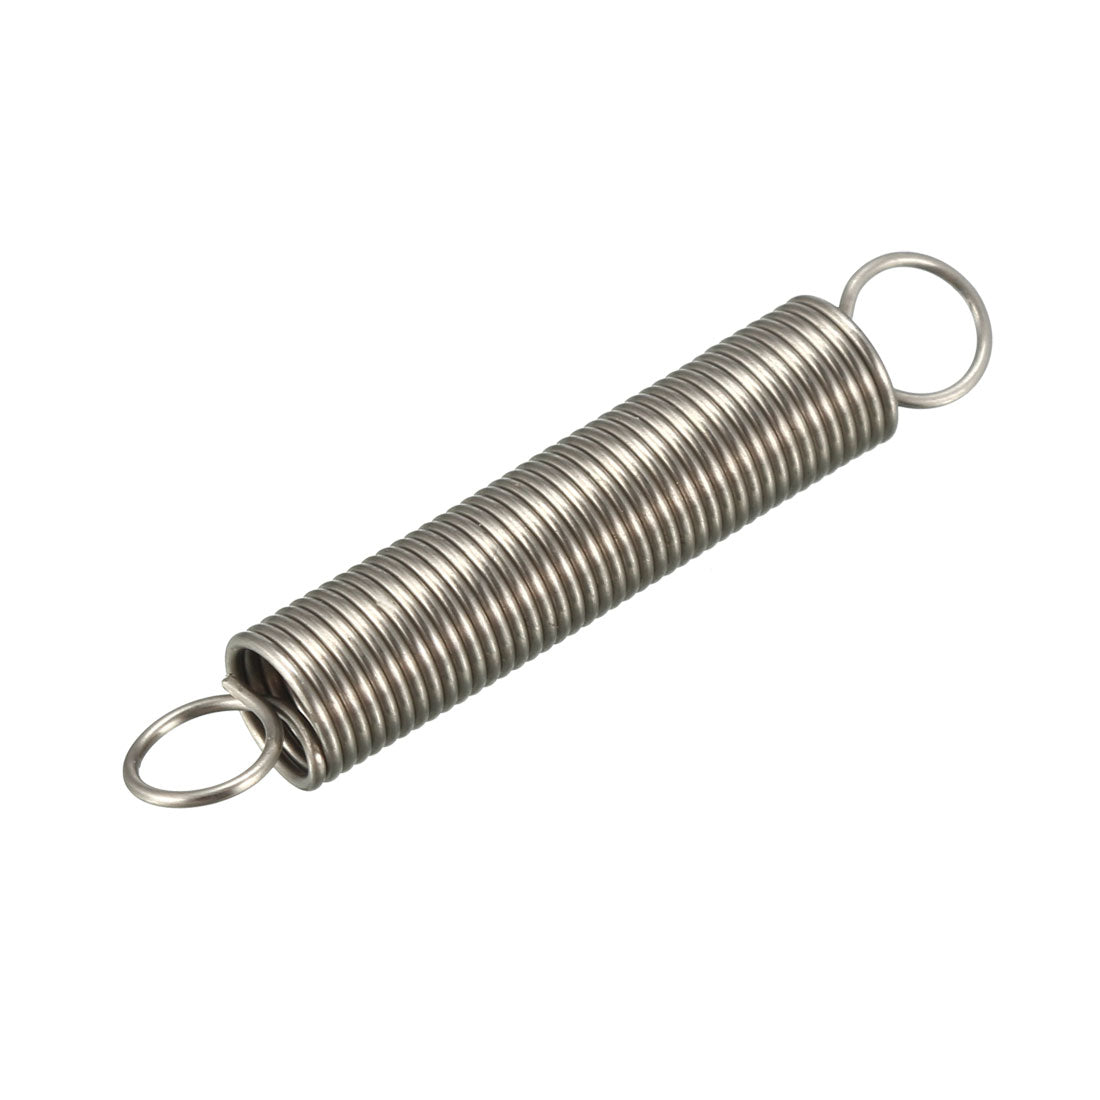 uxcell Uxcell Extended Tension Spring Wire Diameter 0.02", OD 0.2", Free Length 1.18" 5pcs